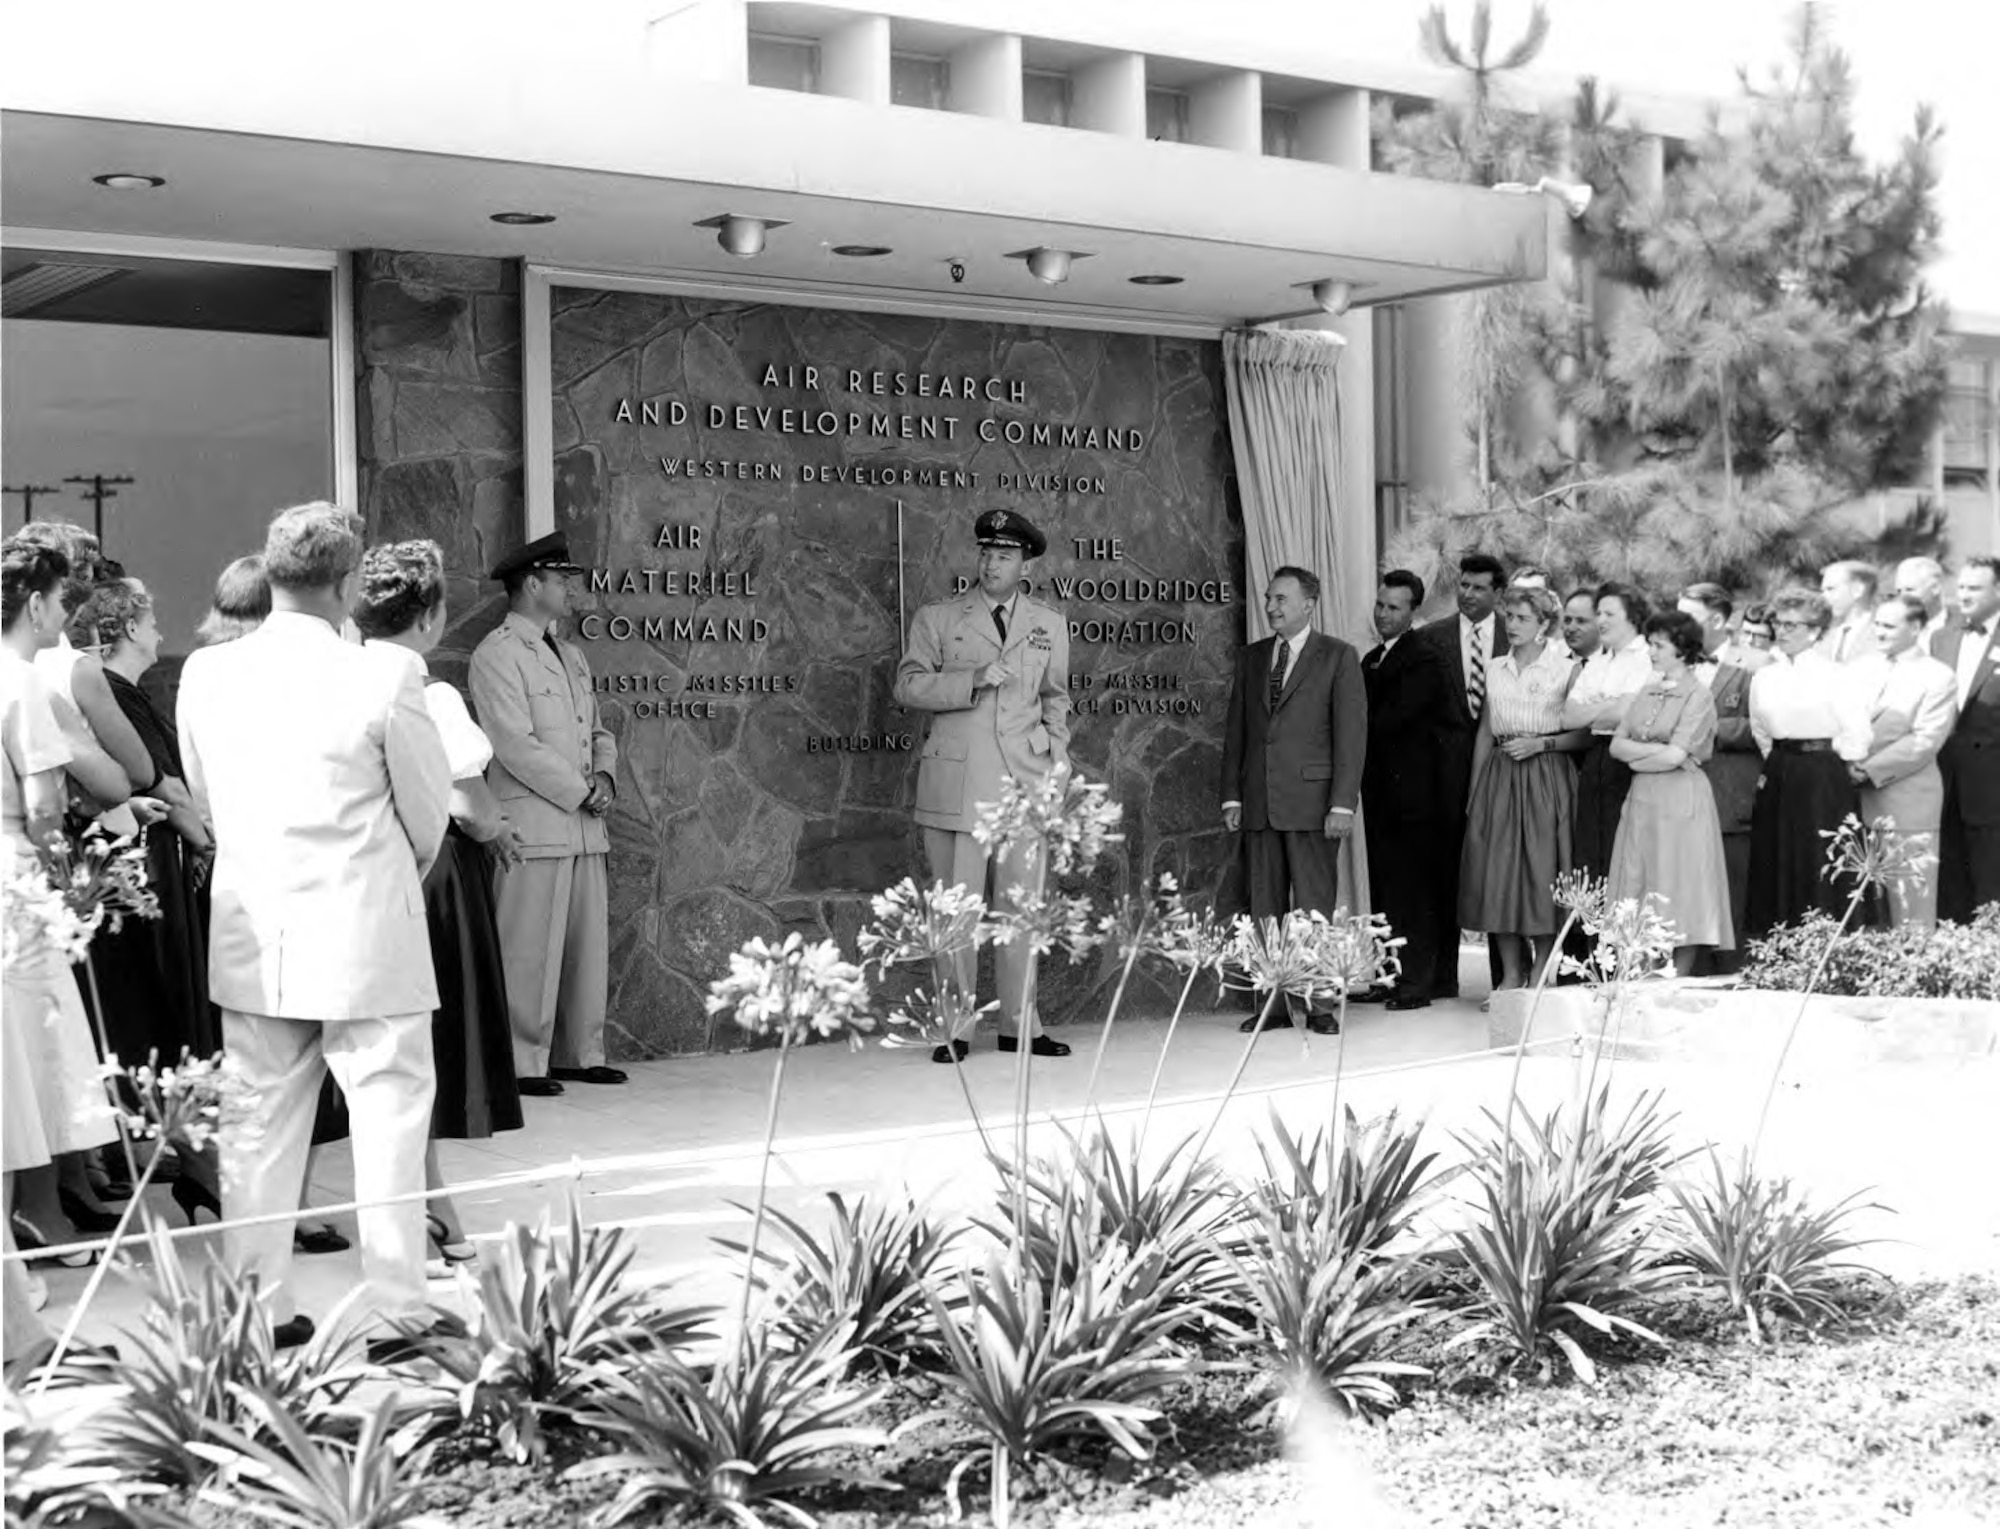 Then-Maj..Gen. Bernard Schriever presides over the new Western Development Division facility on Arbor Vitae Blvd. in Inglewood, Calif. in 1956. Dr. Simon Ramo of the Ramo-Wooldridge Corporation is to Gen. Schriever's left. (U.S. Air Force photo)